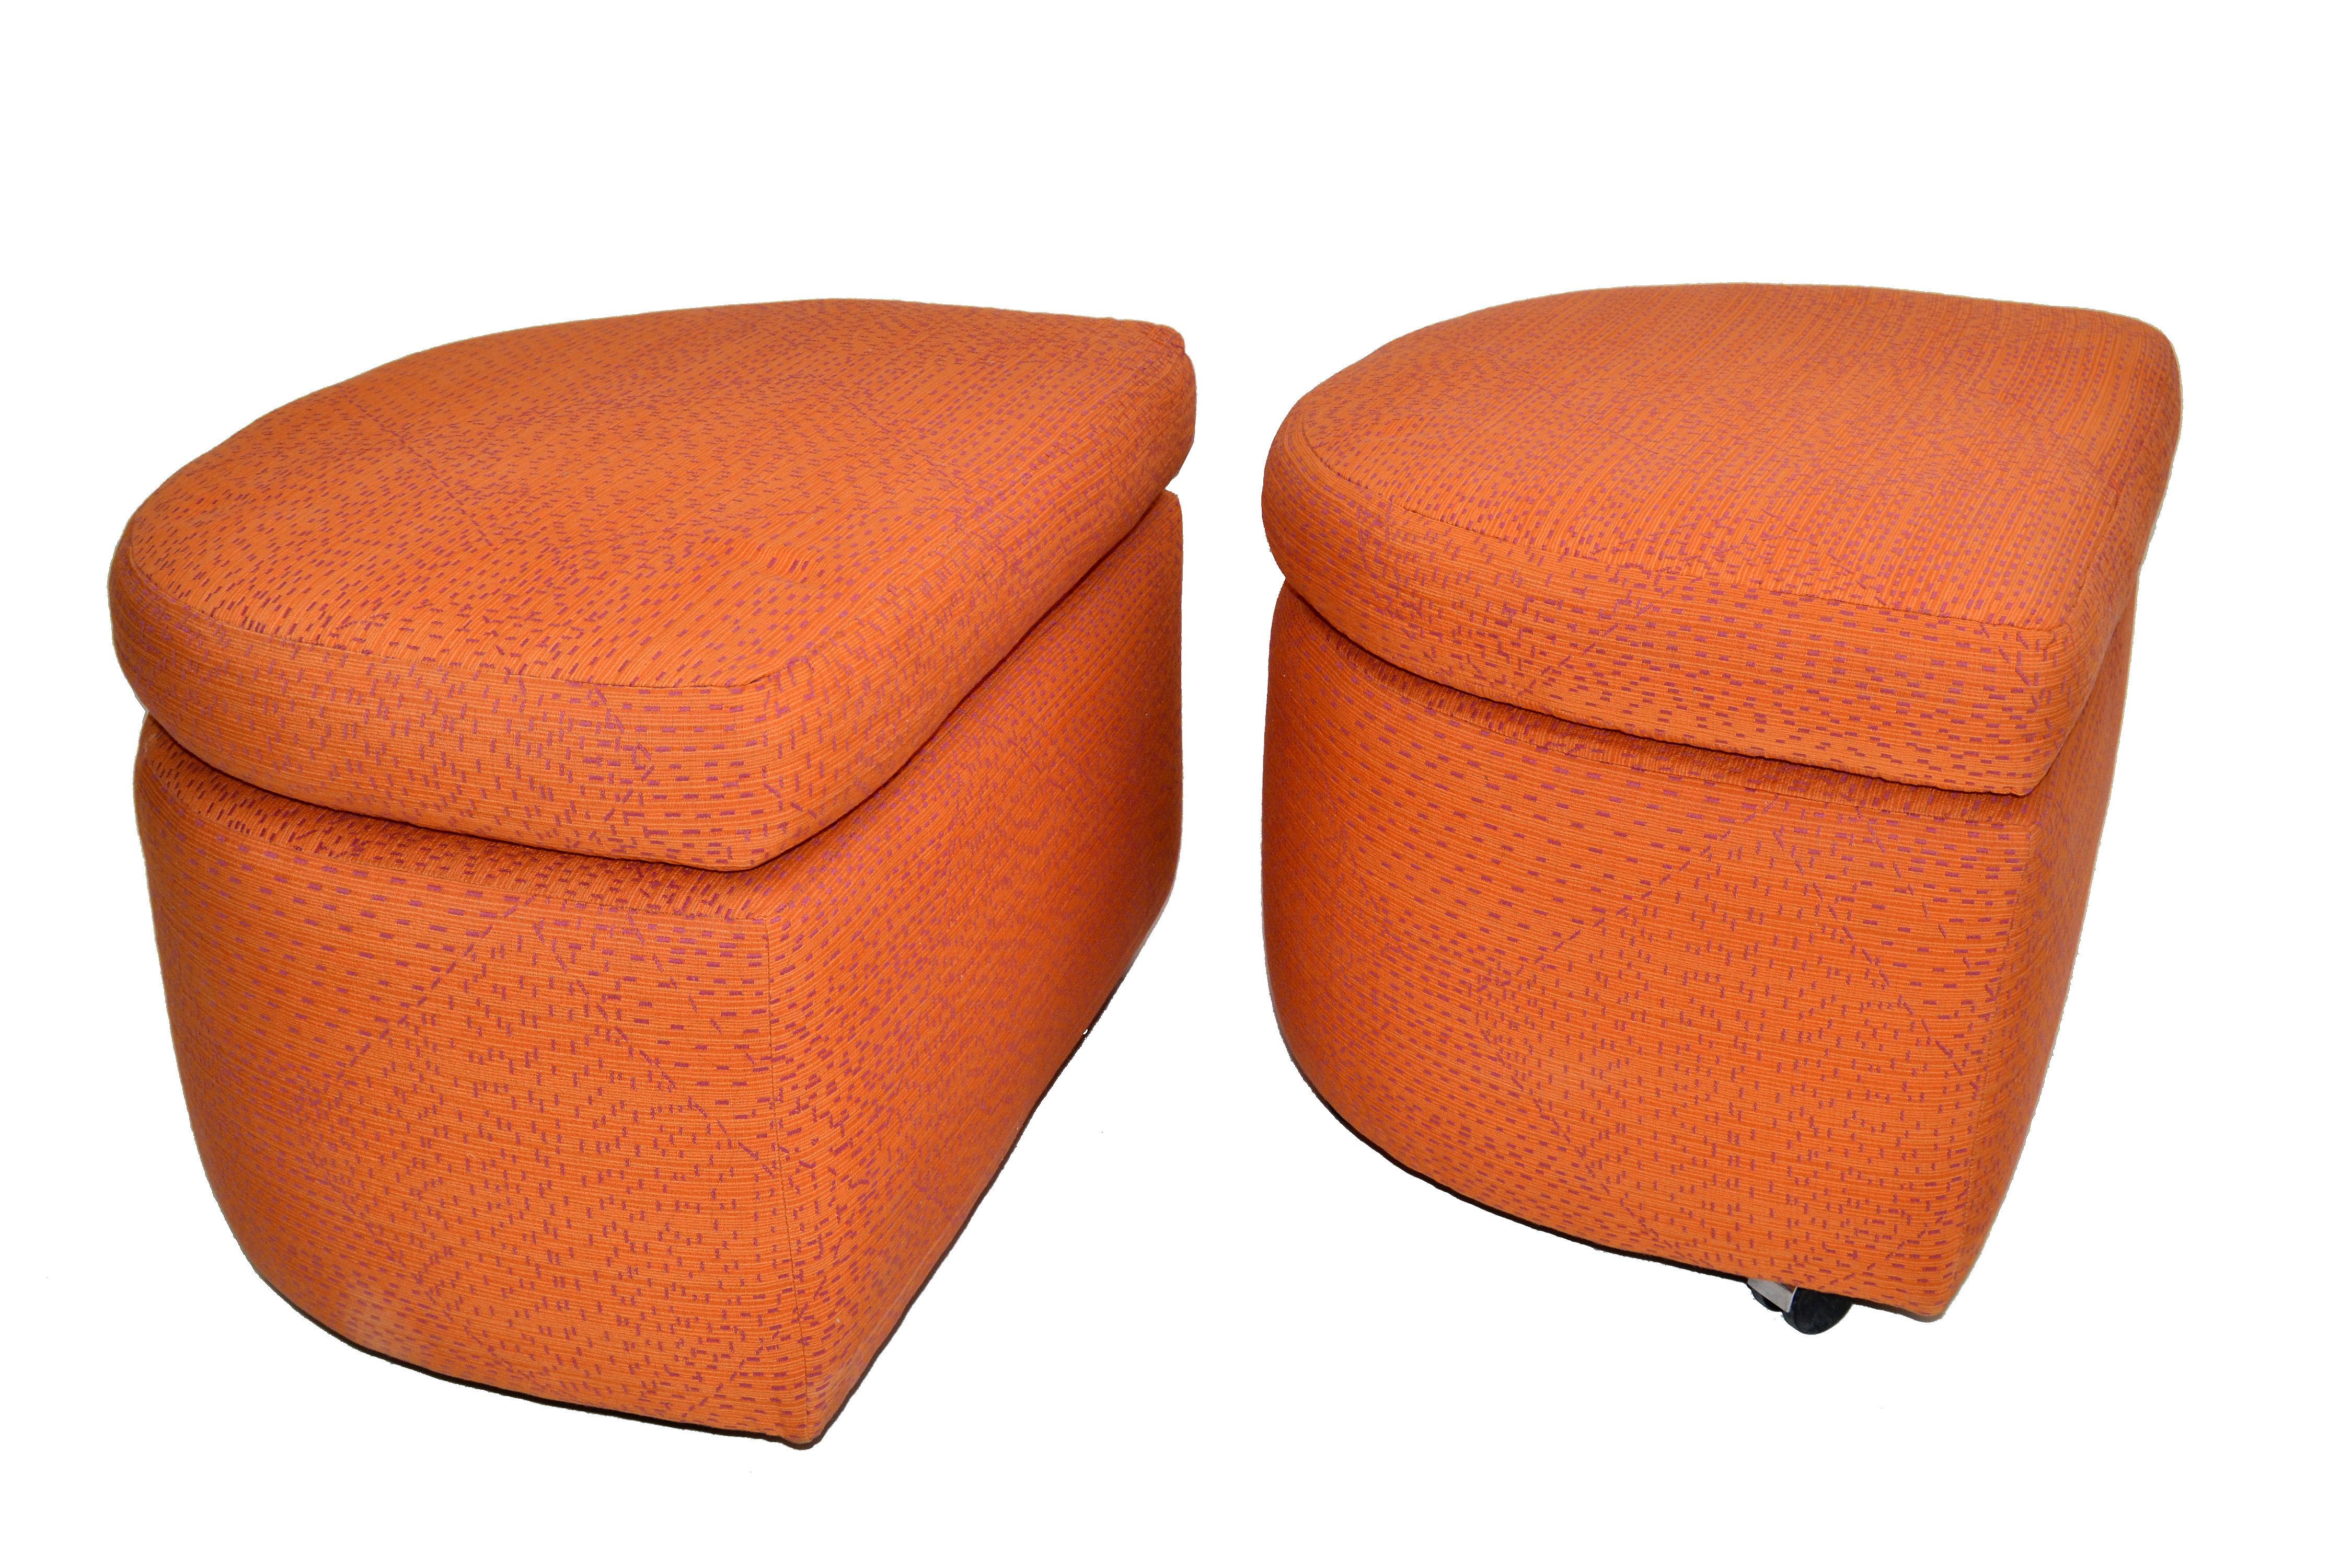 Wood Mid-Century Modern Orange Cotton Upholstery Ottoman on Casters & Cushions - Pair For Sale